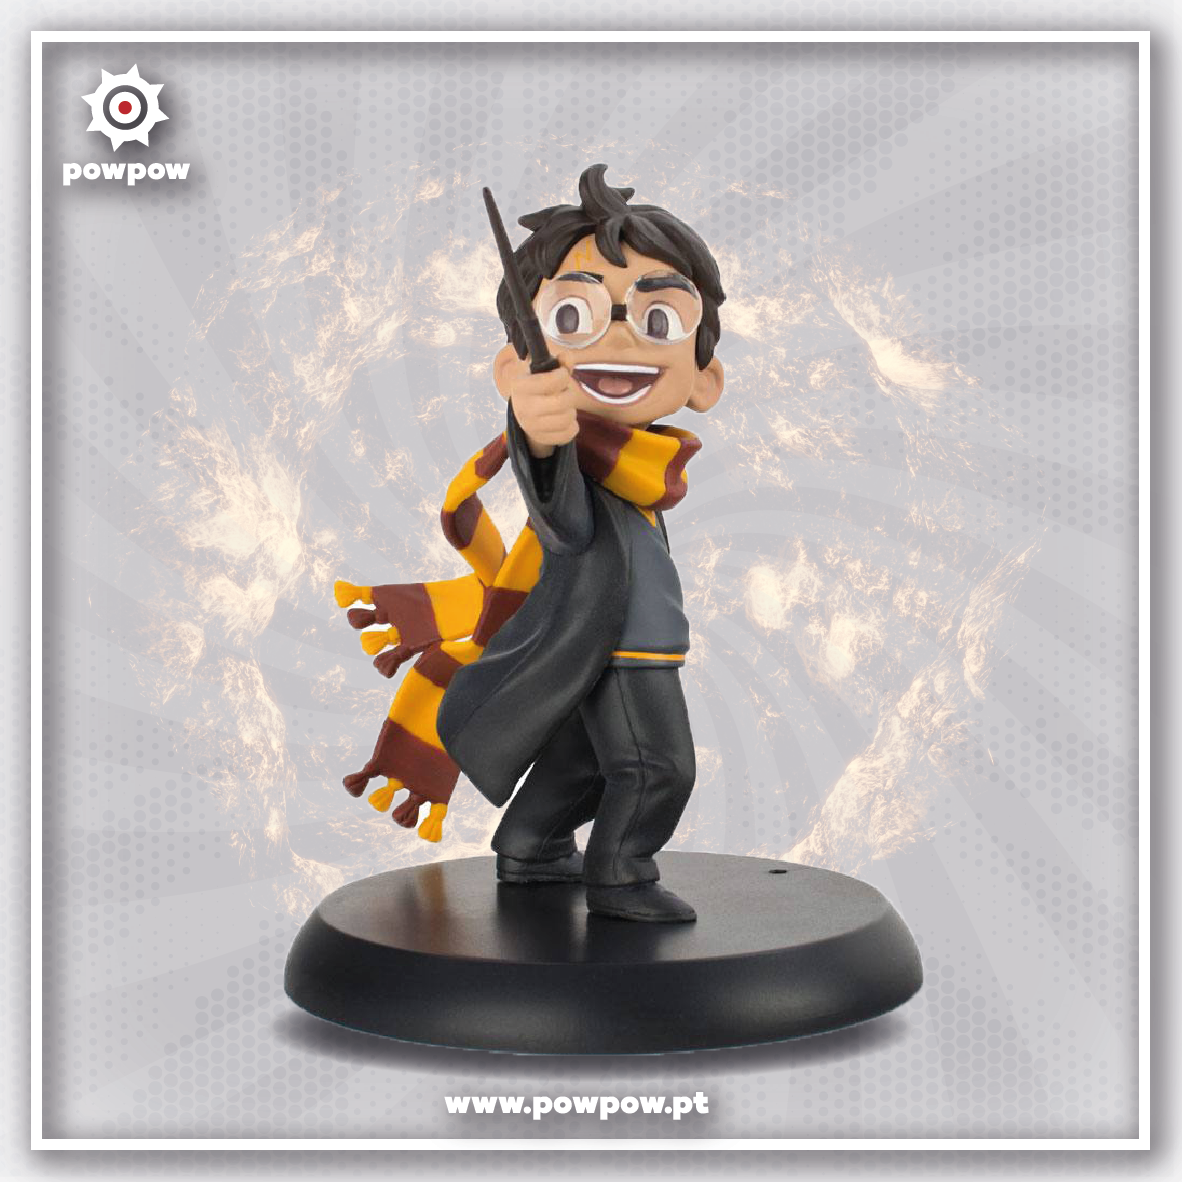 Q-Fig Harry Potter - Harry’s First Spell